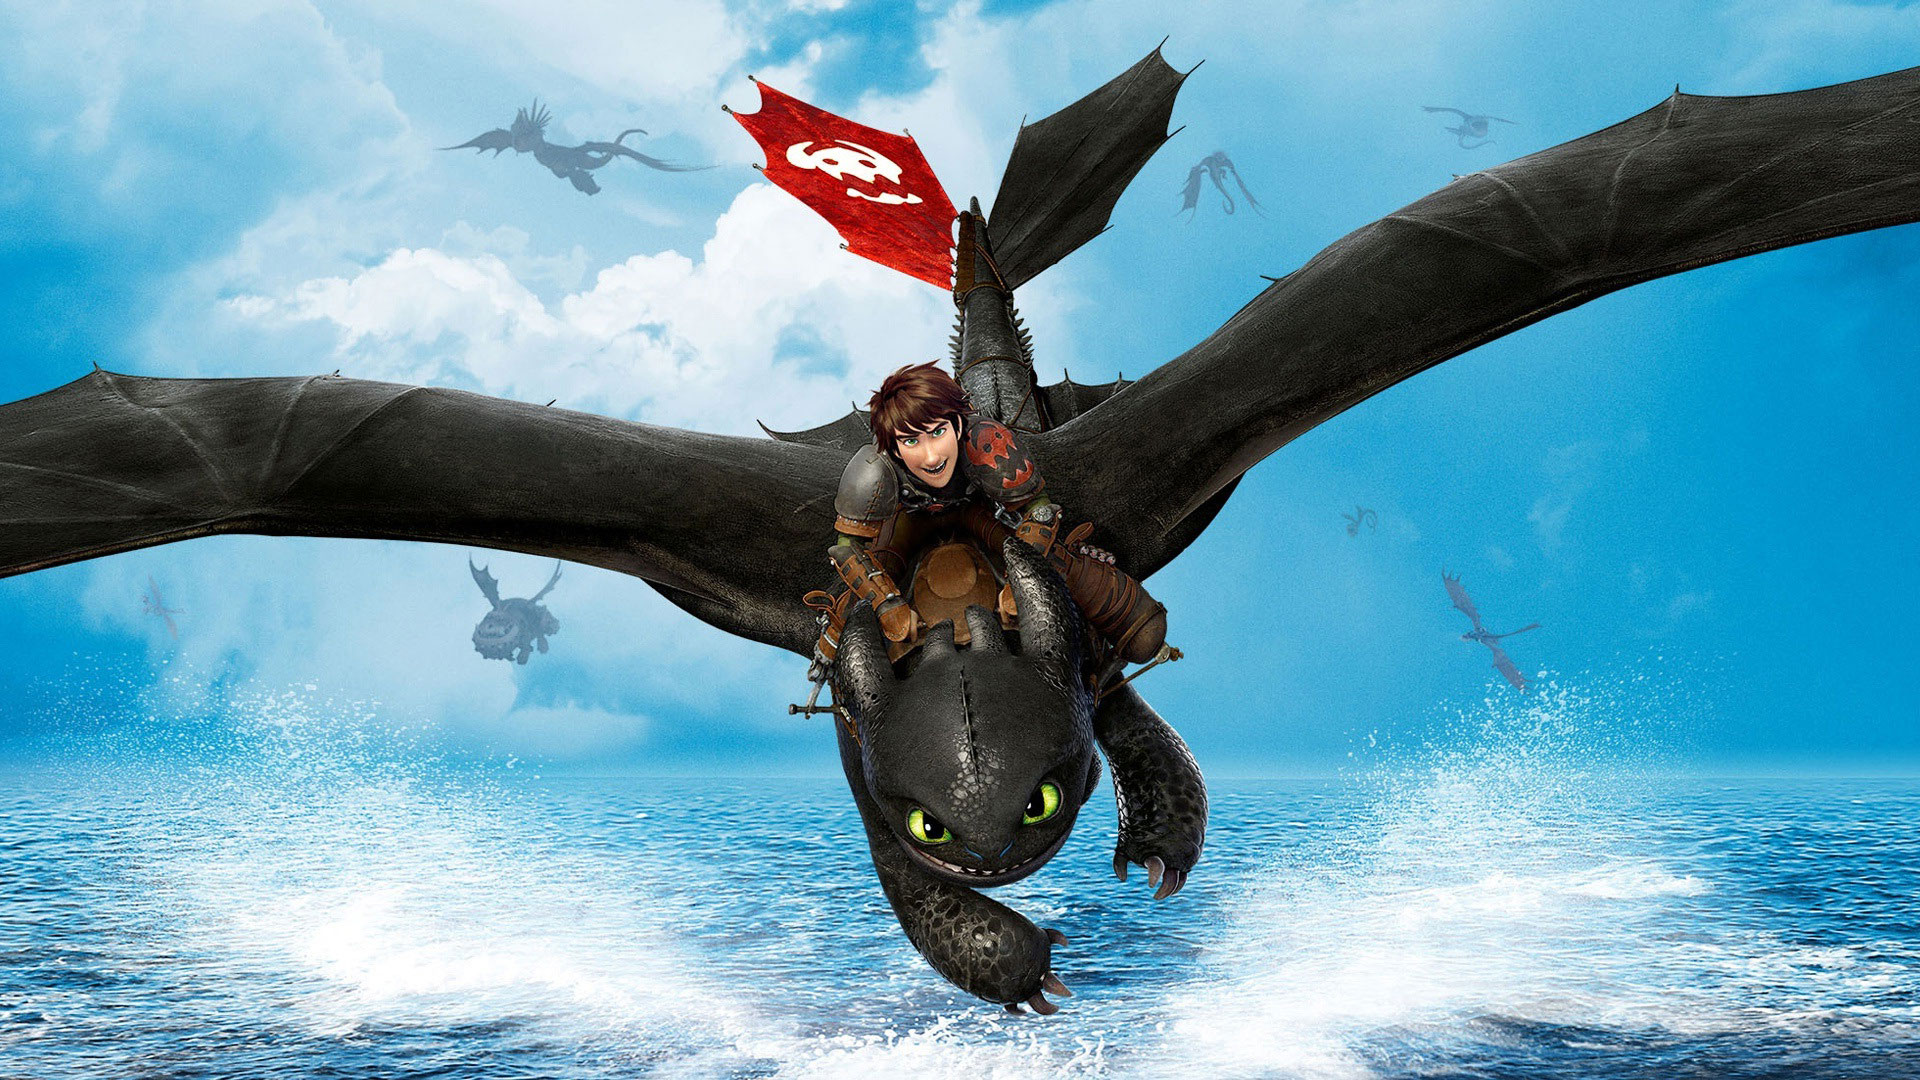 How To Train Your Dragon #3